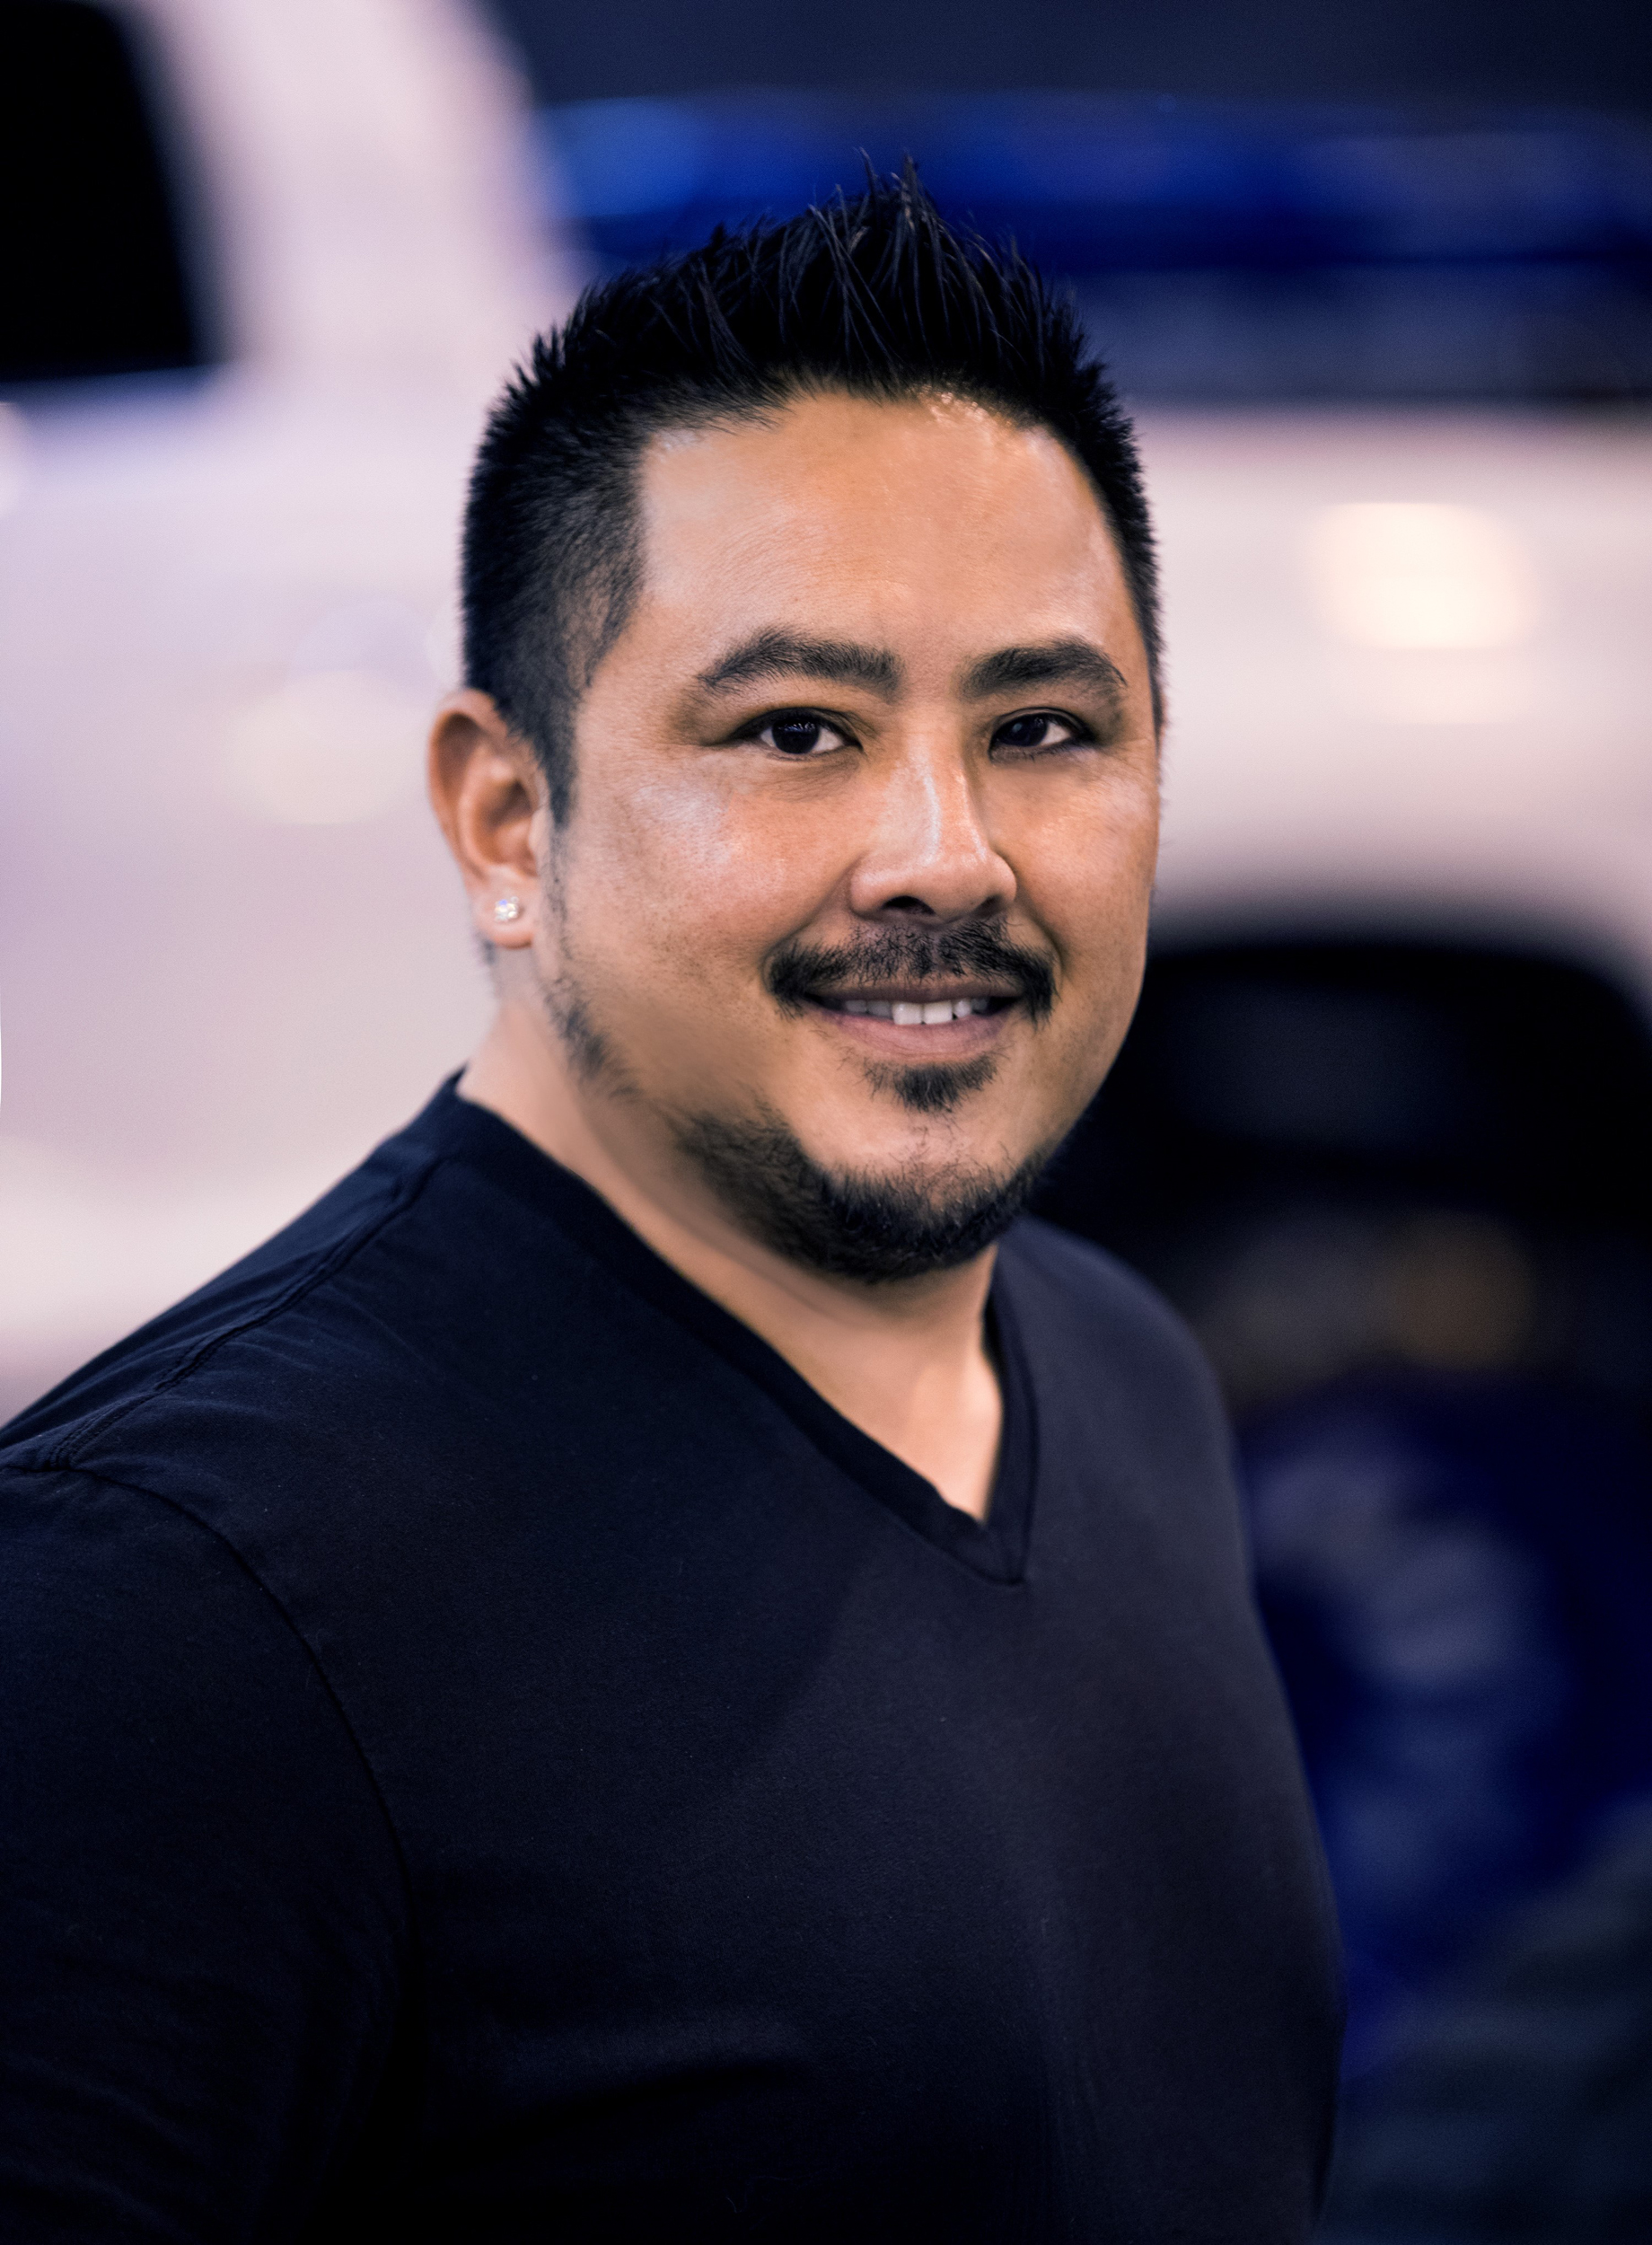 DUB co-founder and entrepreneur Myles Kovacs will conduct interviews on the SEMA Education STAGE